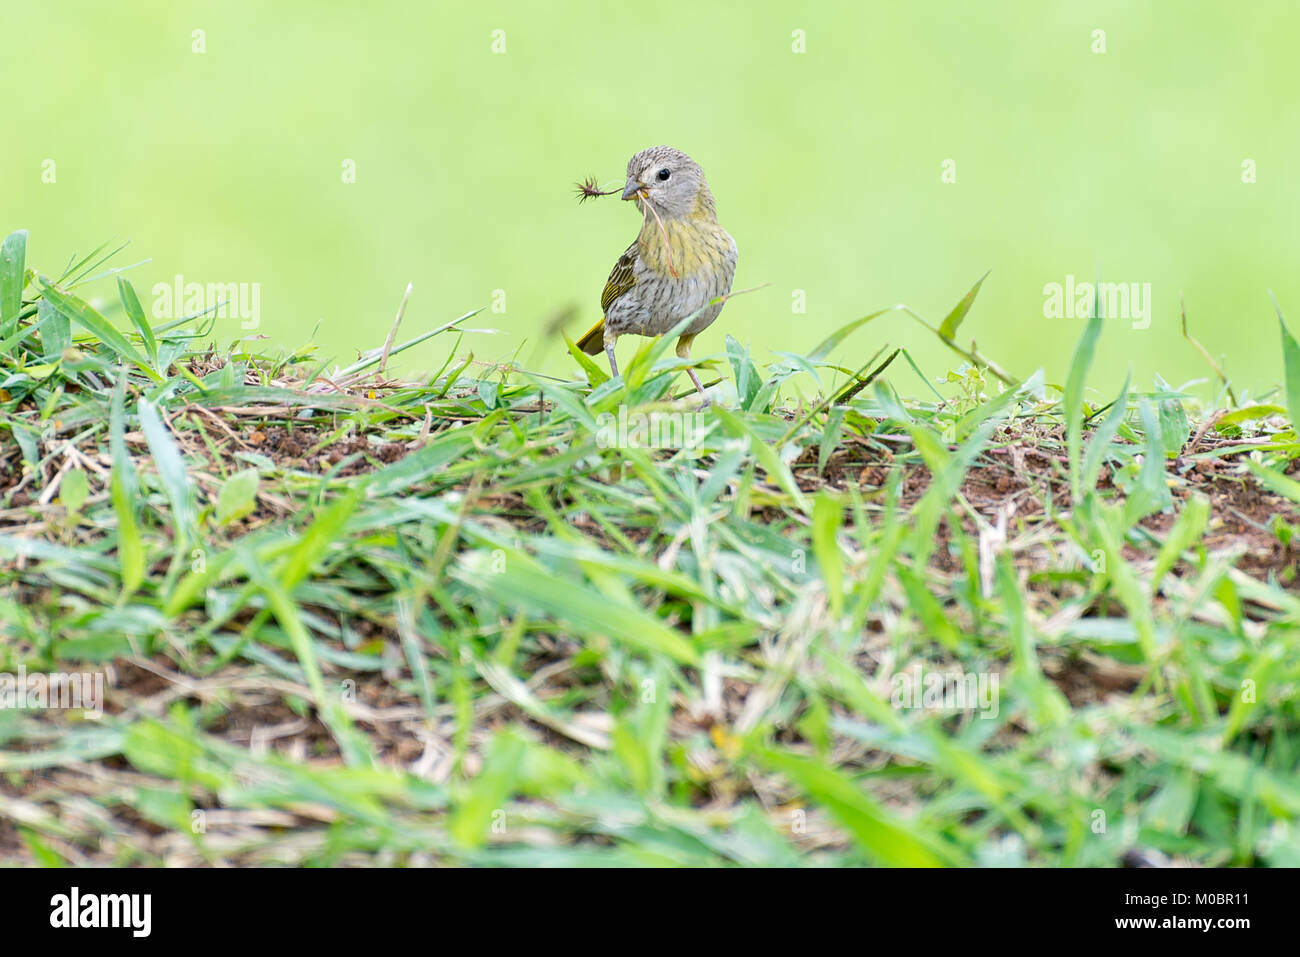 Little bird holding branch with the beak to make a nest Stock Photo